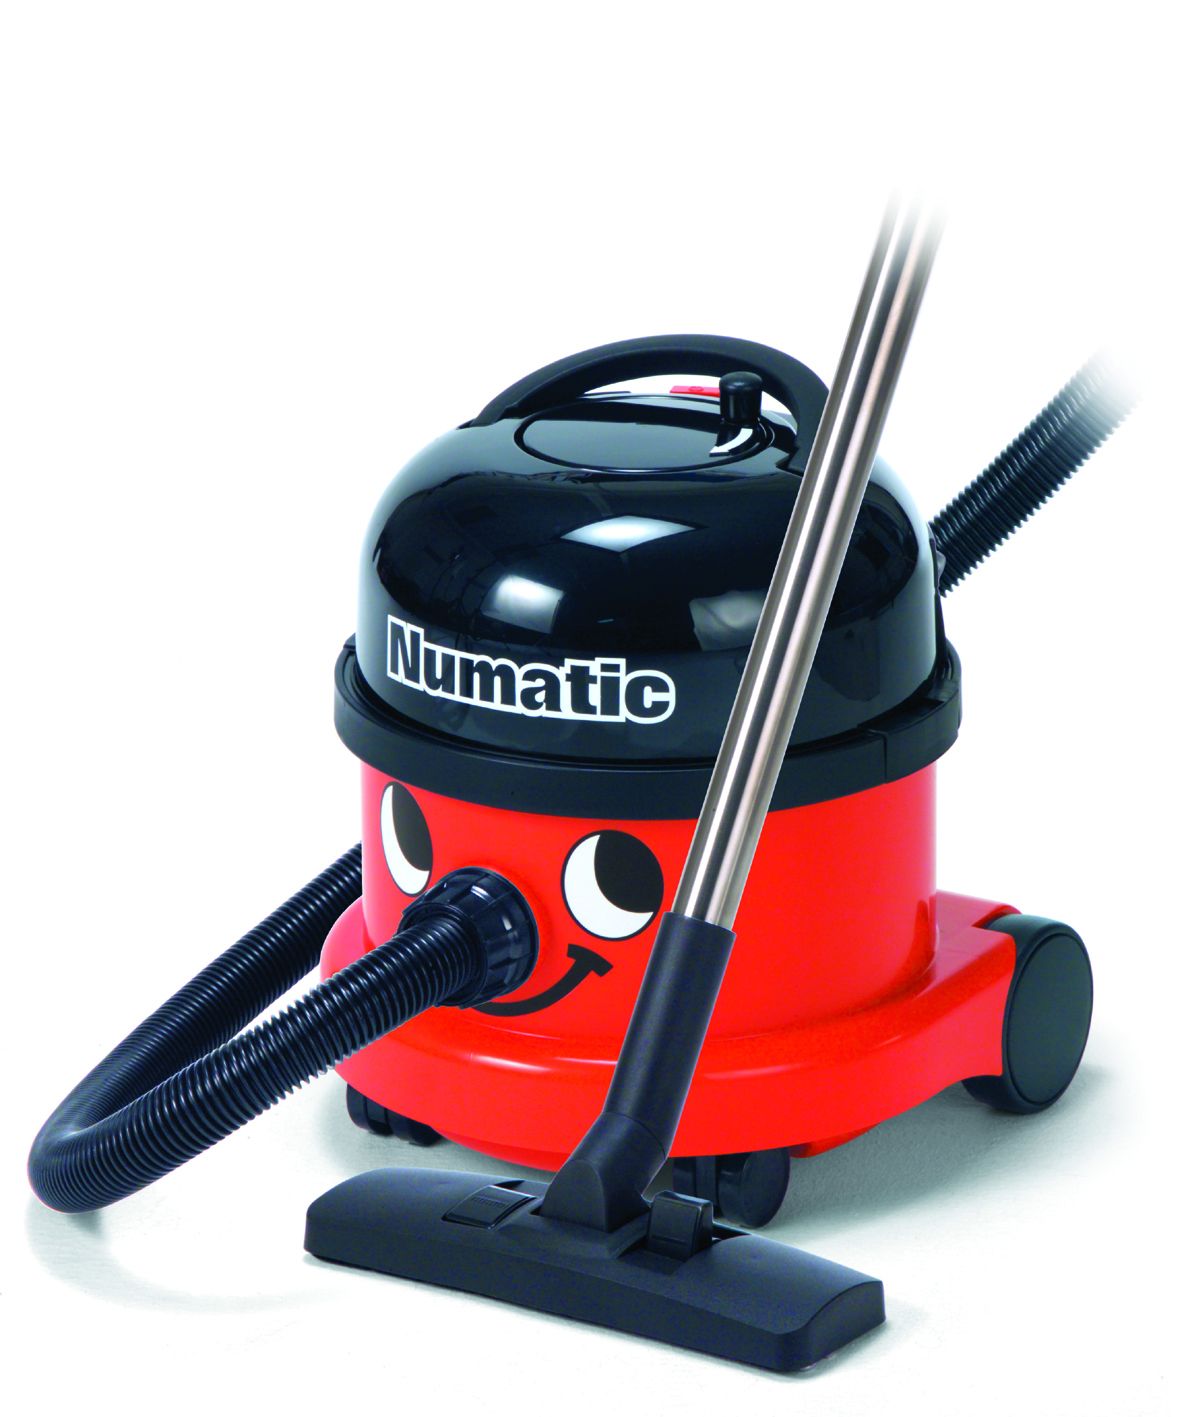 Numatic Henry Vacuum Cleaner NRV240 9Ltr 620W Red Red 9Ltr 620W